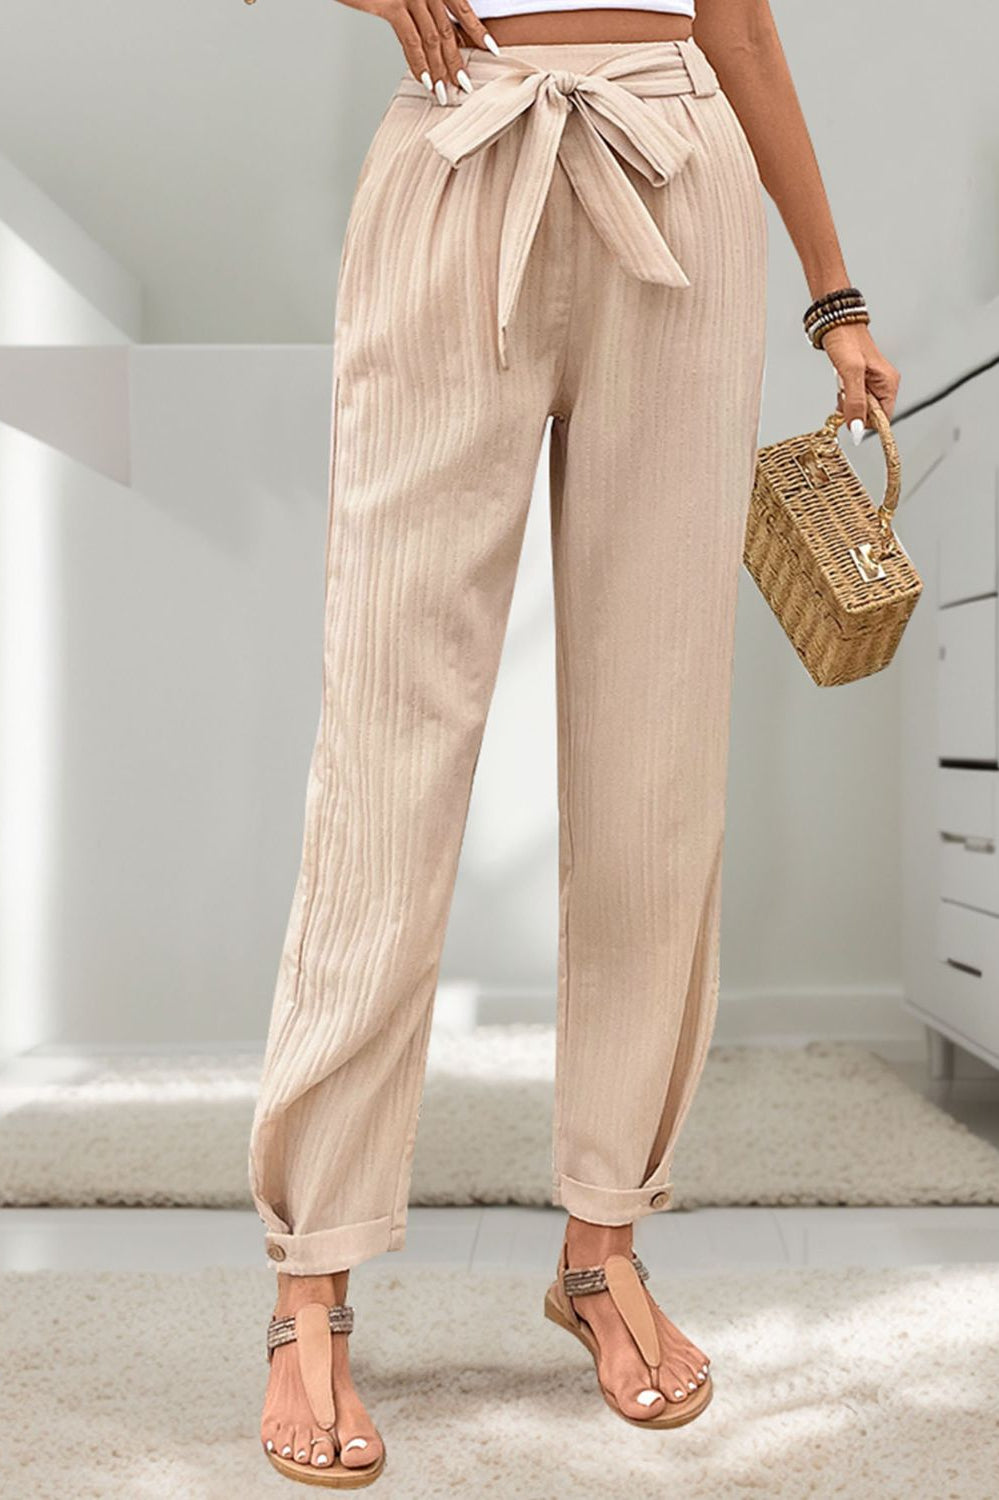 Tied High Waist Pants Casual Chic Botique